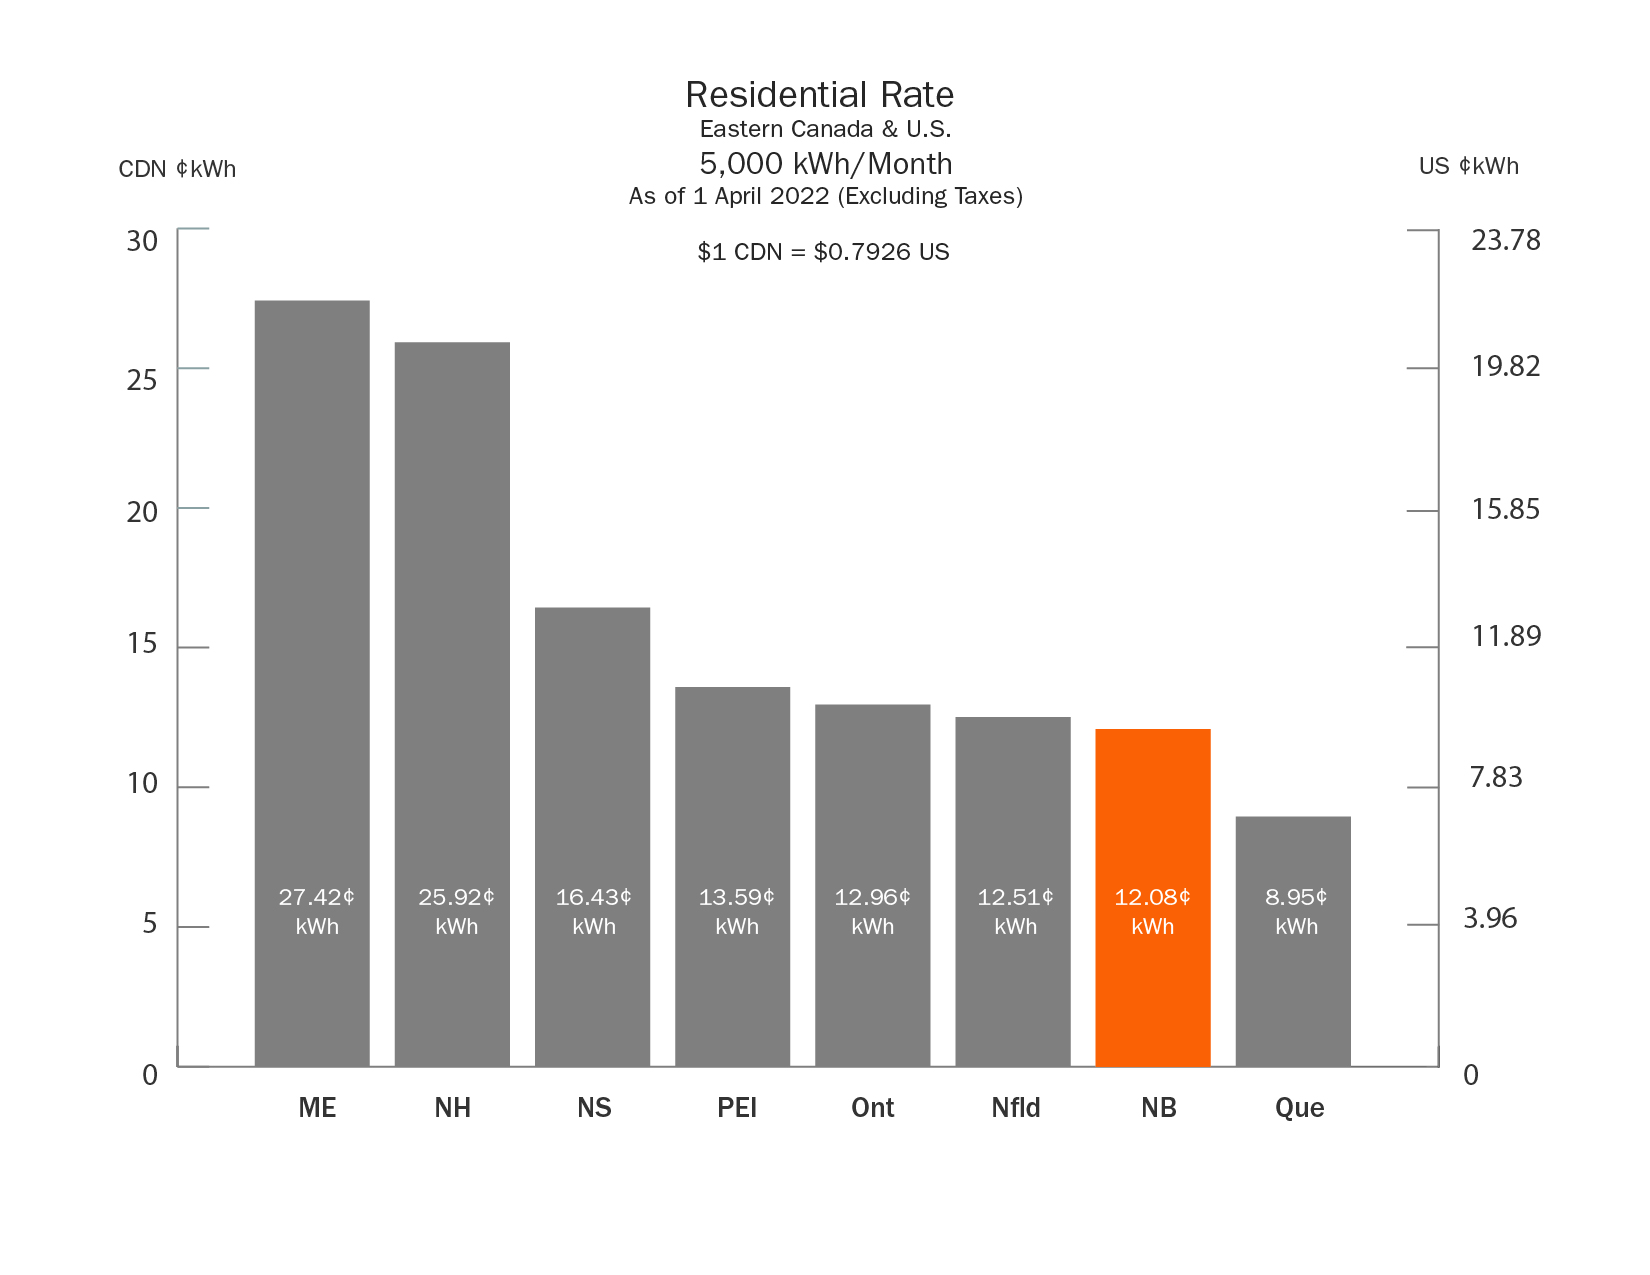 Residential Rate Chart 5 000 KWh/month